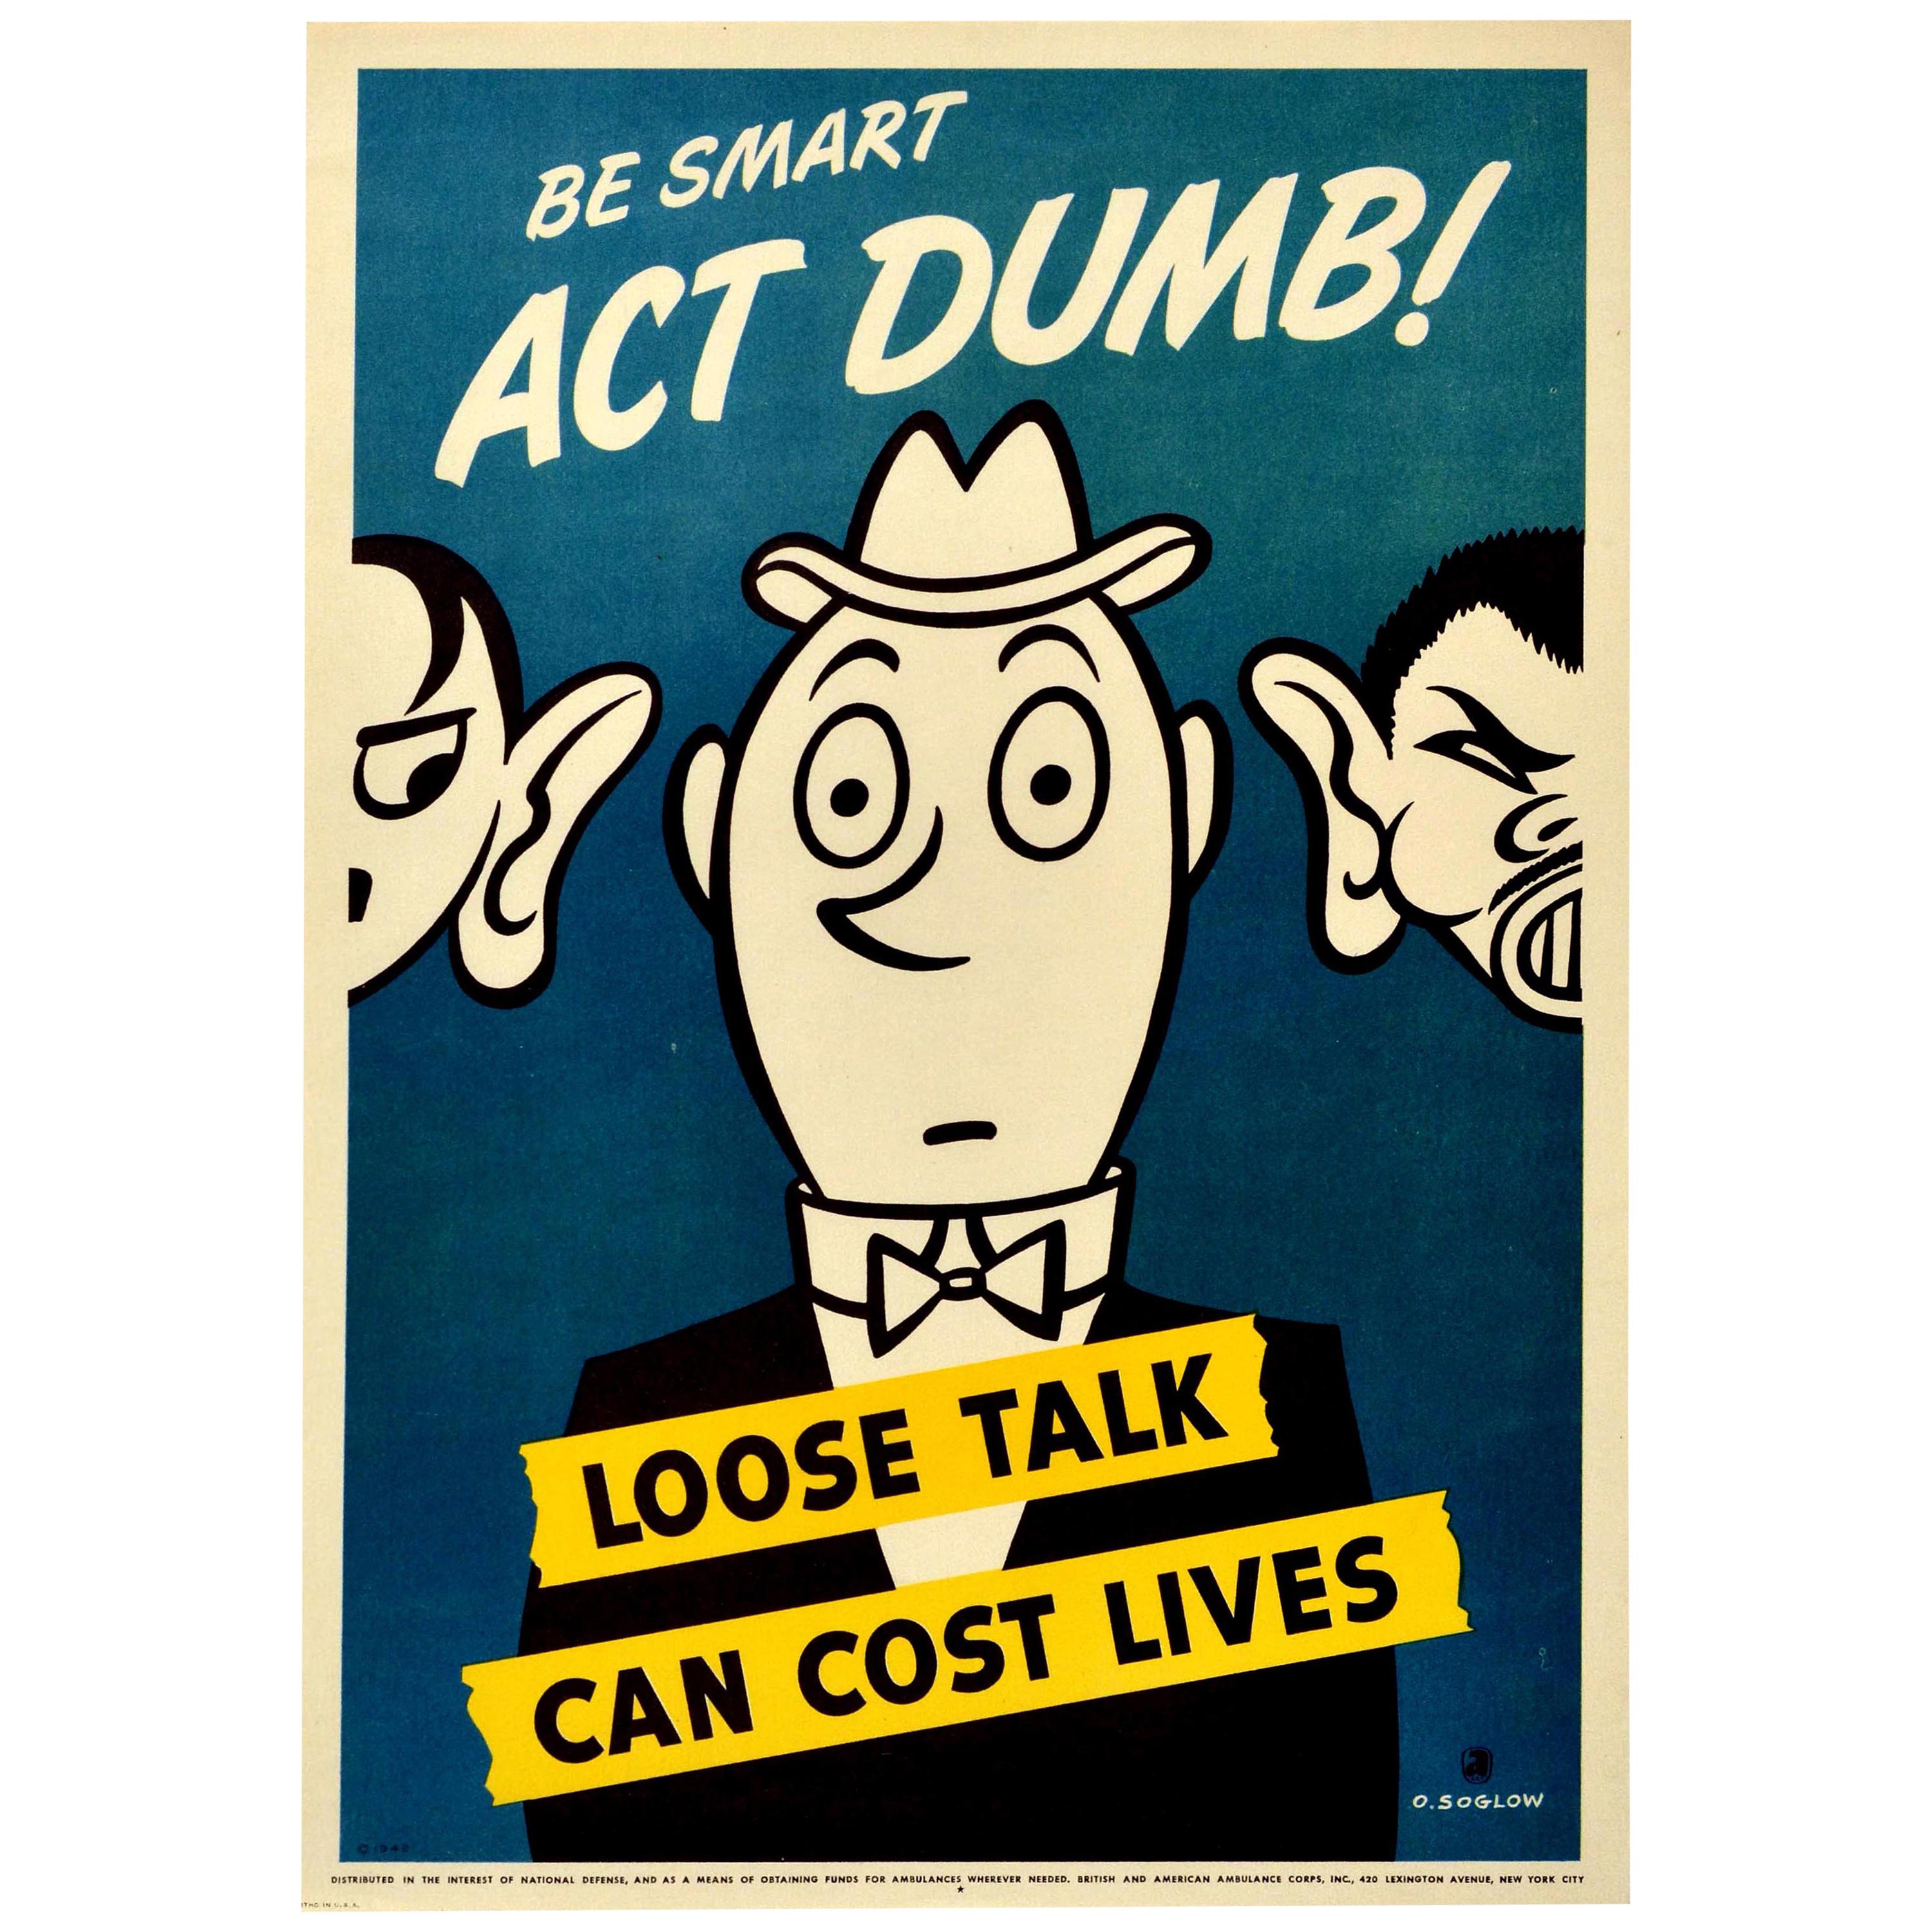 Original Vintage Poster Be Smart Act Dumb Loose Talk Can Cost Lives WWII Defense